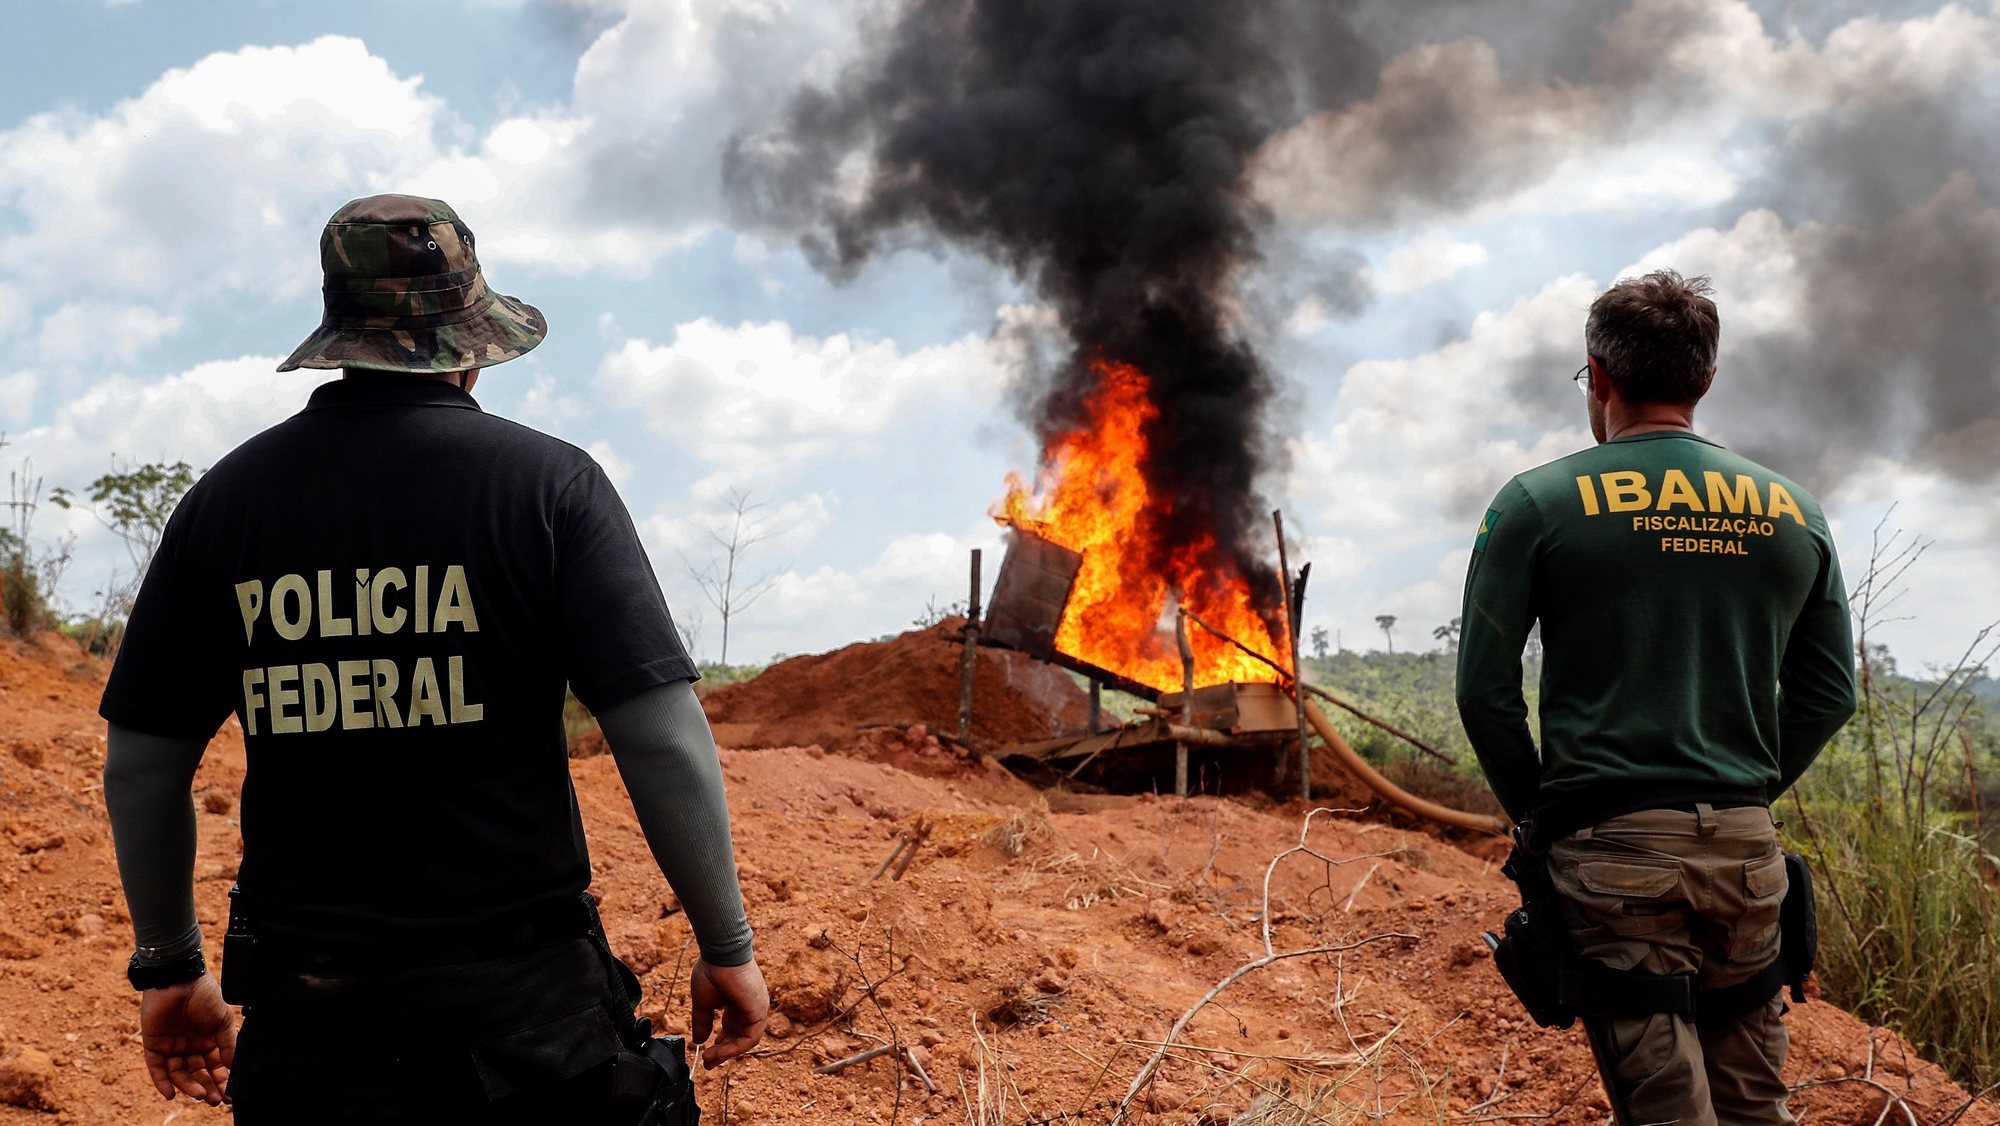 epa07806058 Environment agents and Federal Police destroy machinery used for illegal mining on the bank of river Xingu, 70km from Altamira town in the Amazon, Brazil, 31 August 2019. As the Amazon continues on fire, the federal police fights against illegal mining and deforestation in the heart of the Amazon, in the second most violent area in Brazil.  EPA/SEBASTIAO MOREIRA ACOMPAÃ‘A CRÃ“NICA AMAZONÃA INCENDIOS